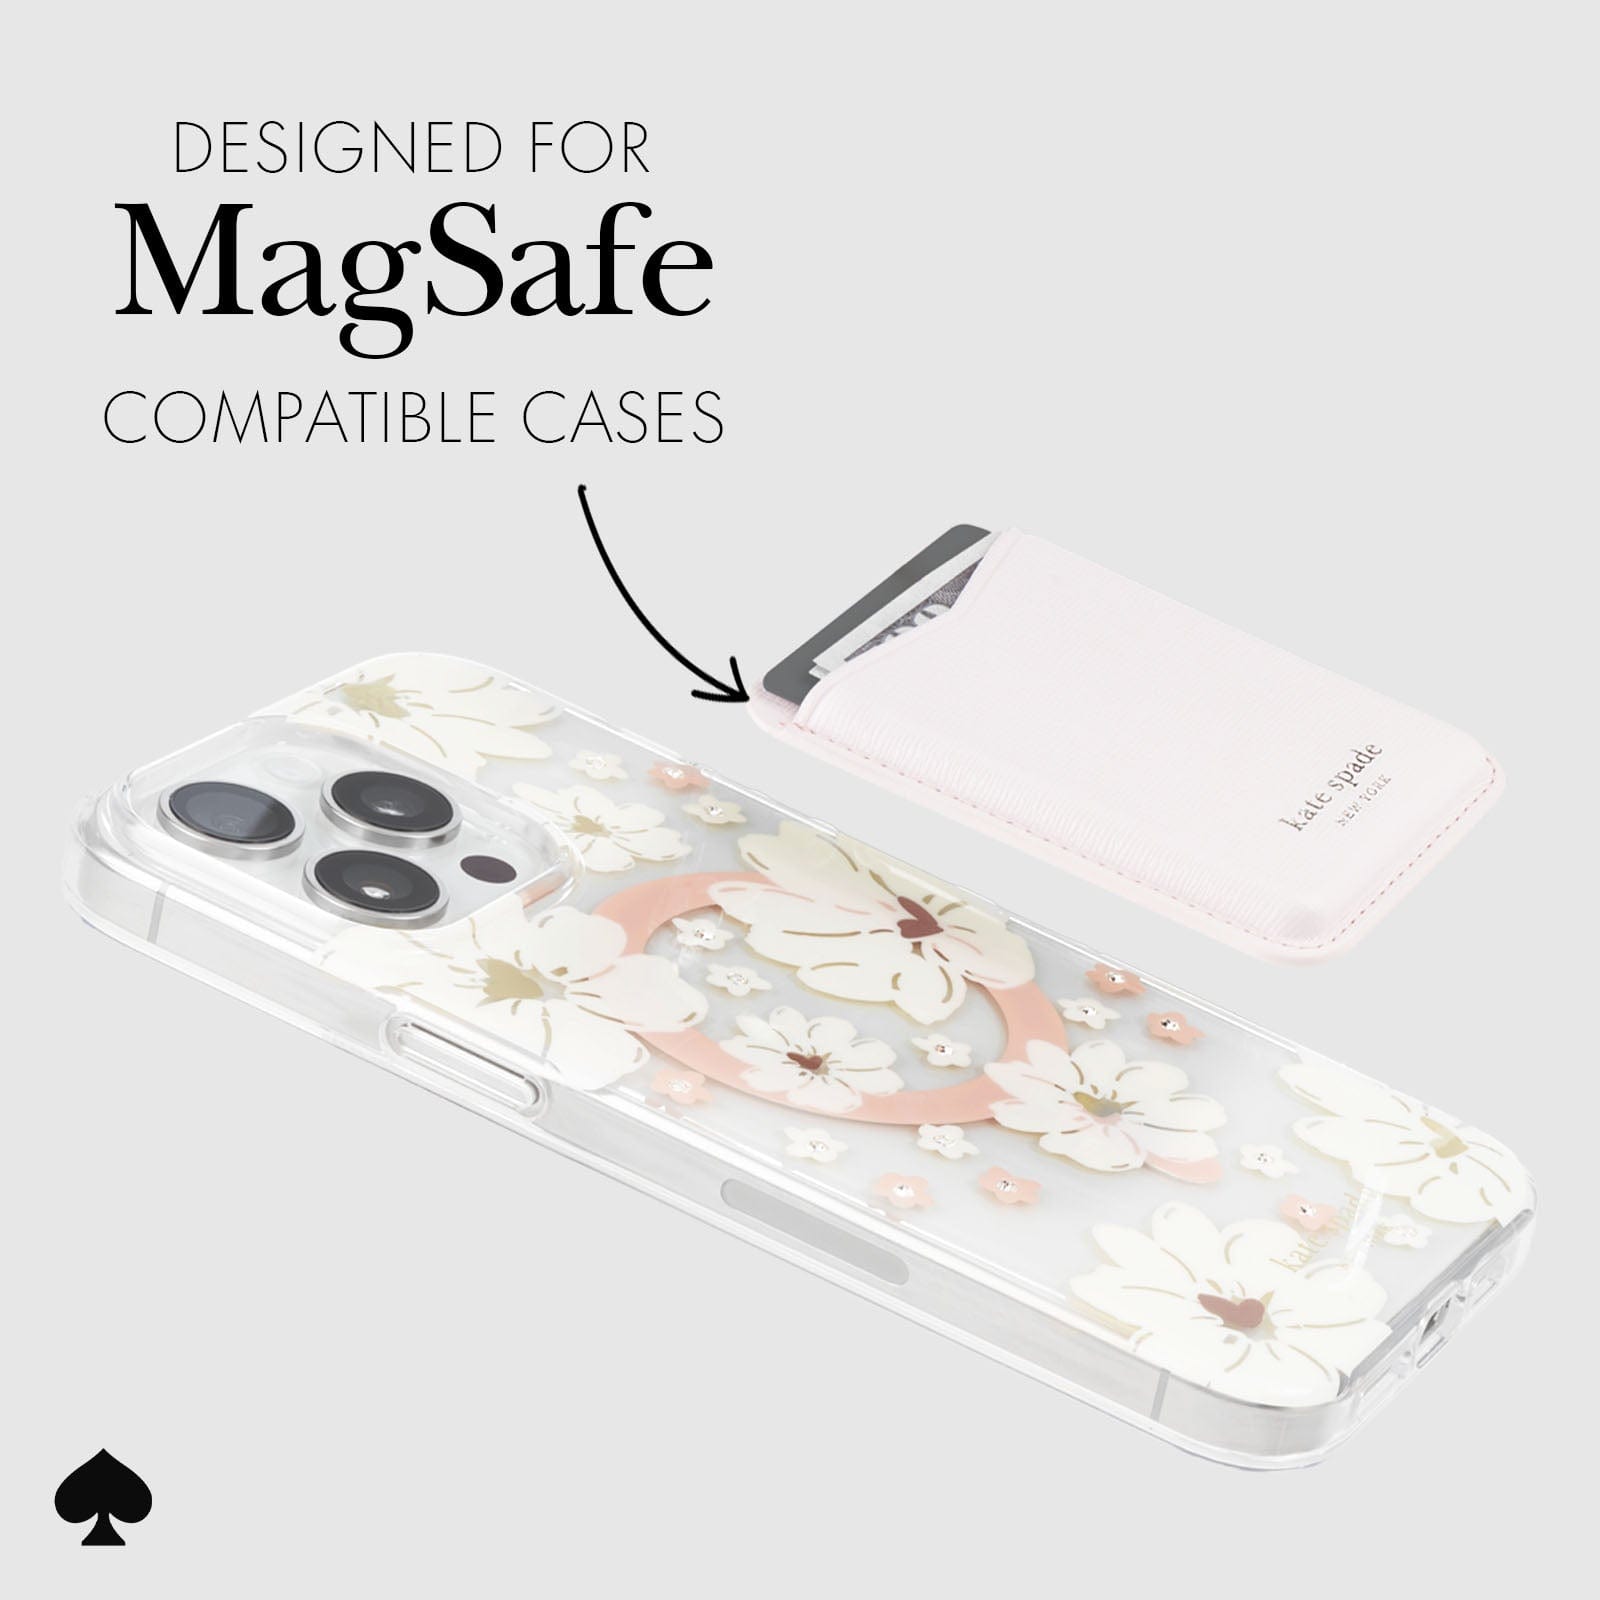 DESIGNED FOR MAGSAFE COMPATIBLE CASES